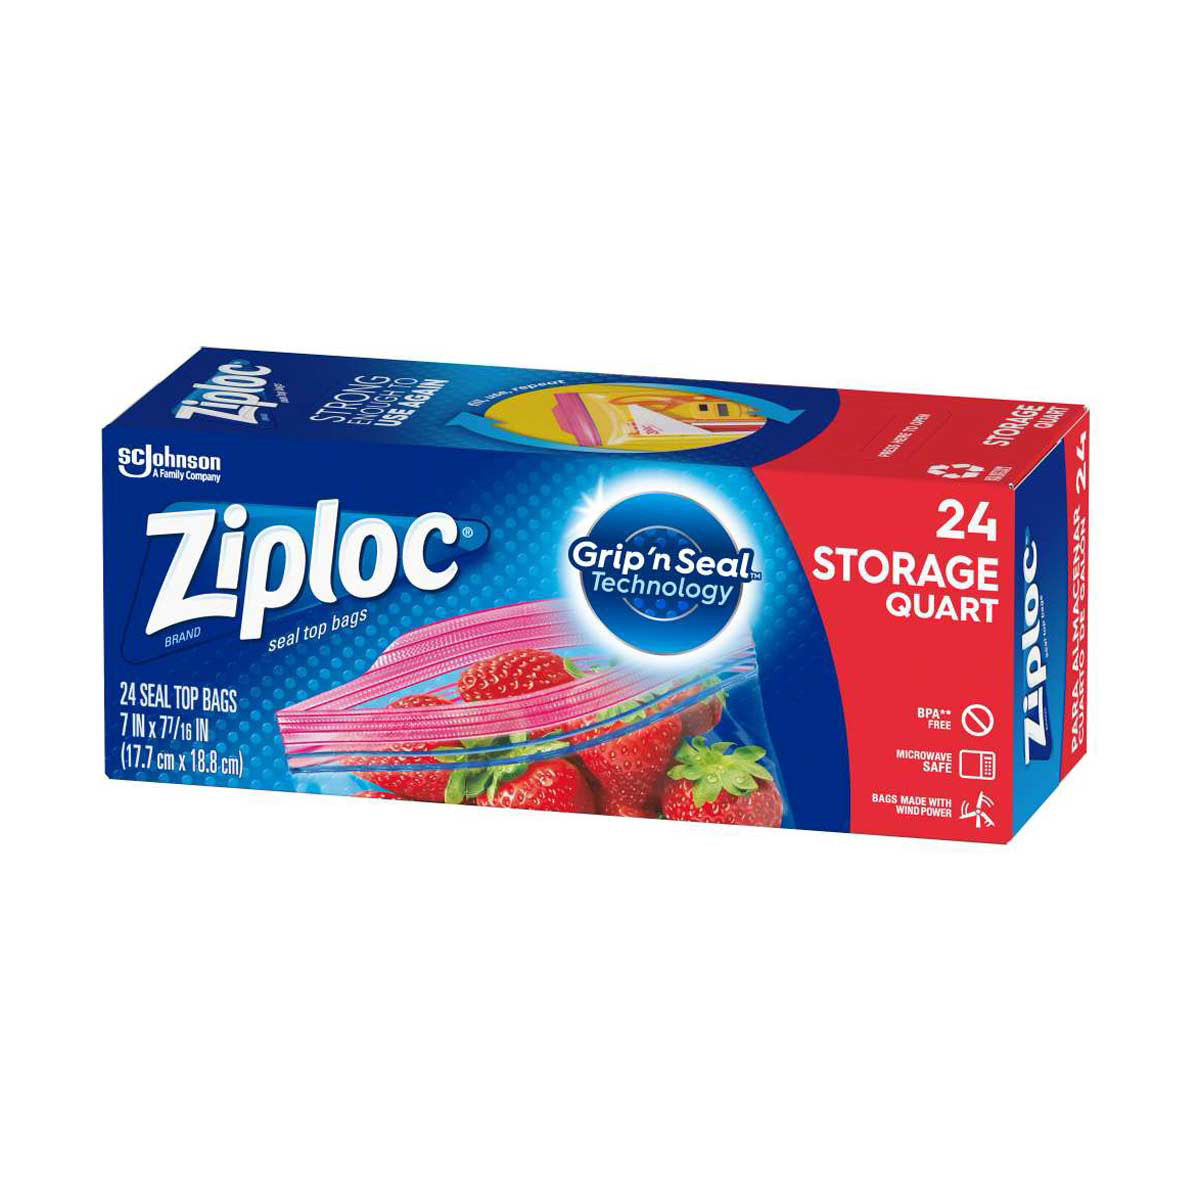 Ziploc Brand Storage Bags with Grip 'n Seal Technology, 24 Count